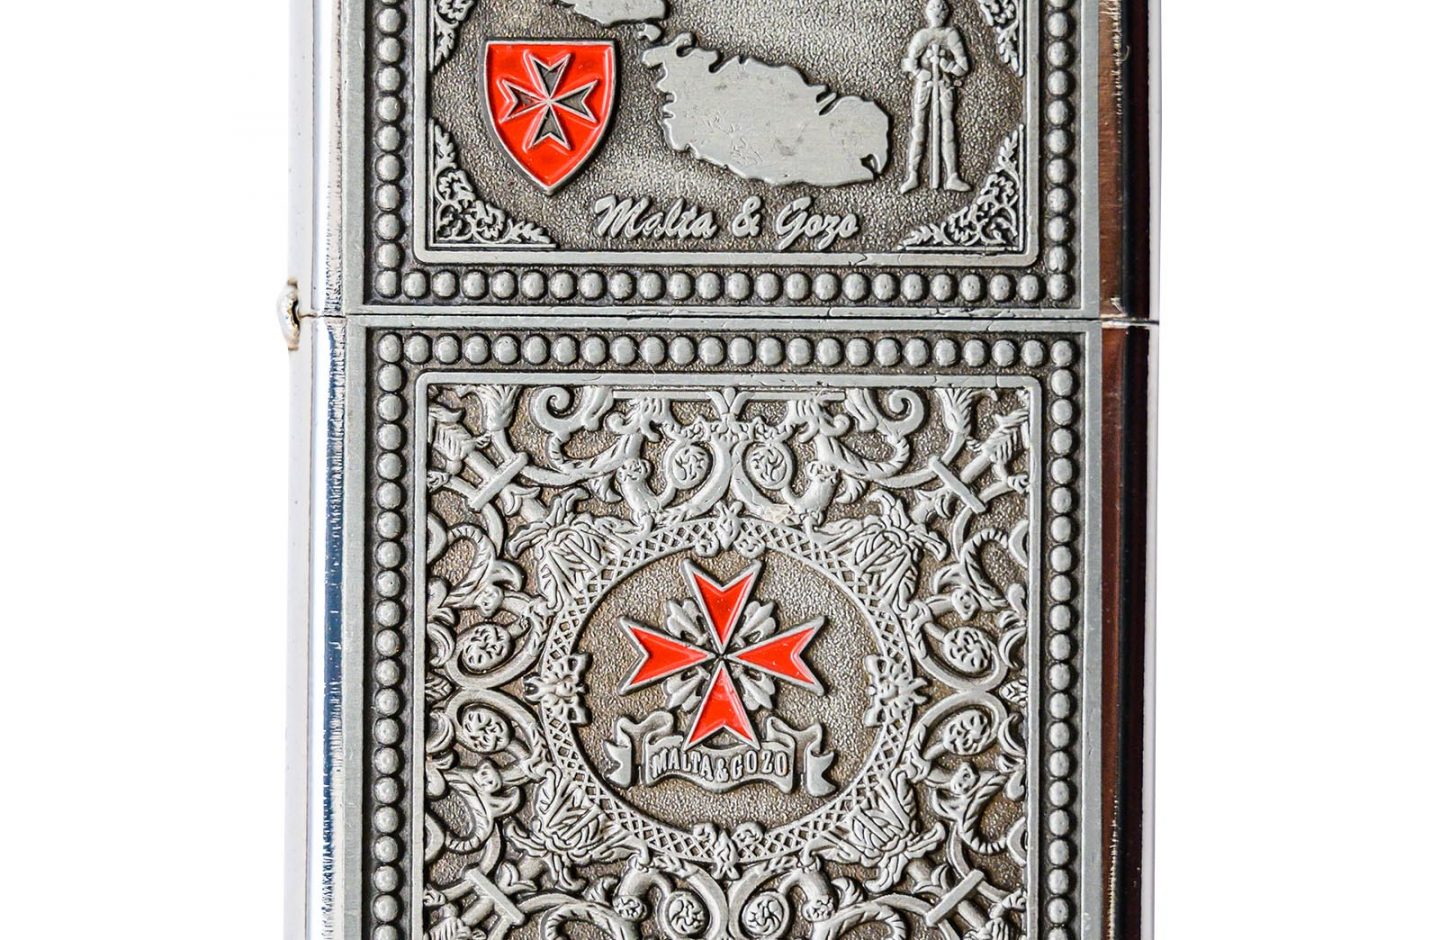 Designed Refillable Metal Lighter:  Malta and Gozo Map with Red 8-Pointed Cross